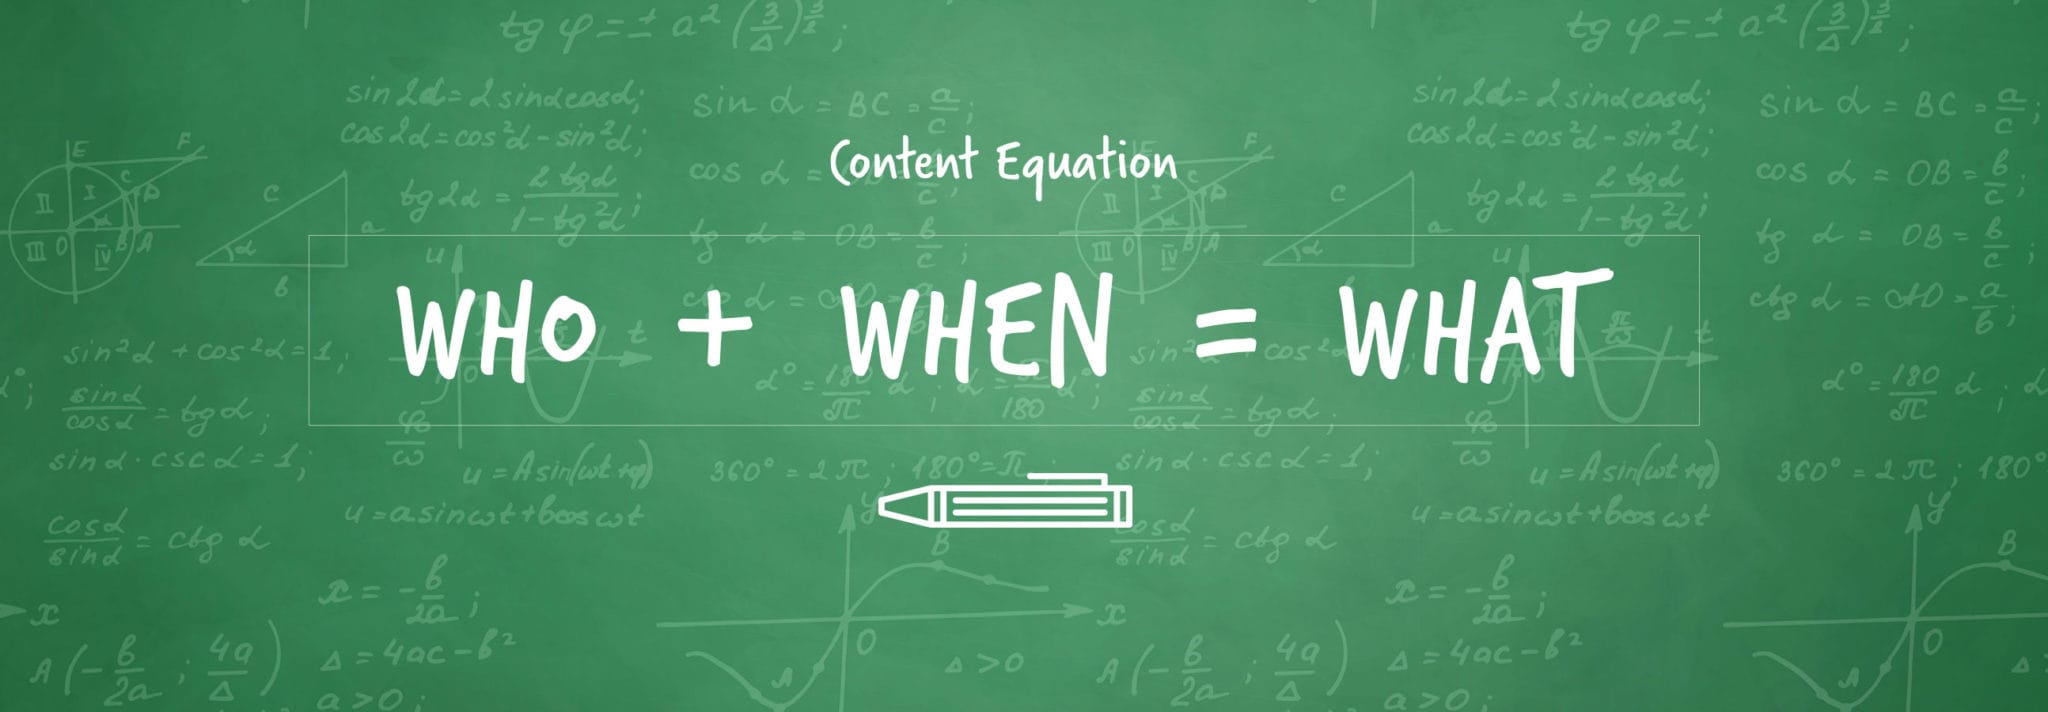 The Content Equation: A Simple Content Strategy Solution